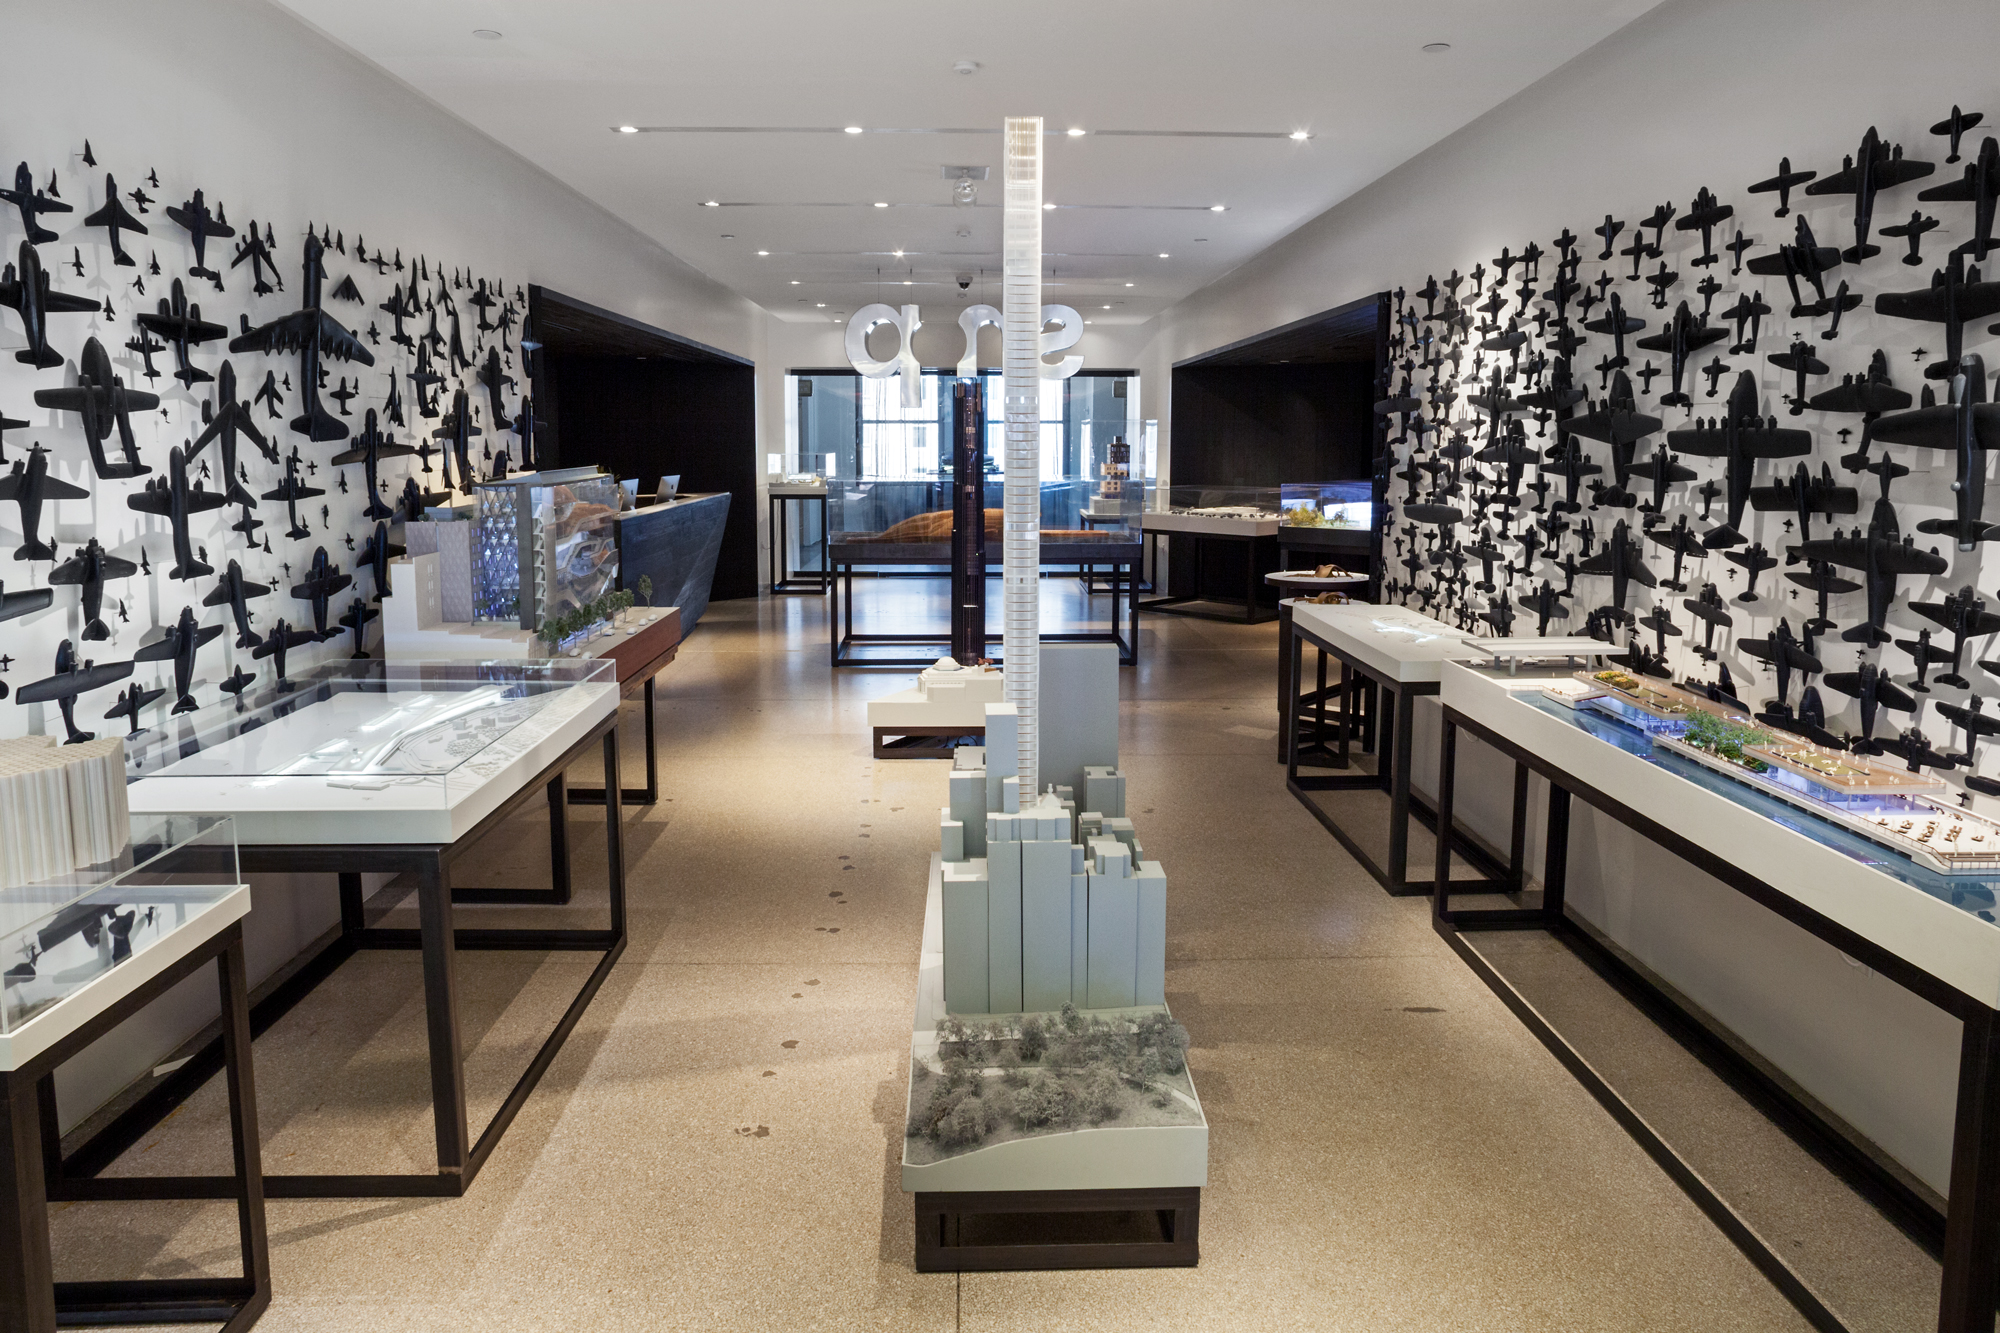 Louis Vuitton  New York Office and Showroom ikon.5 architects